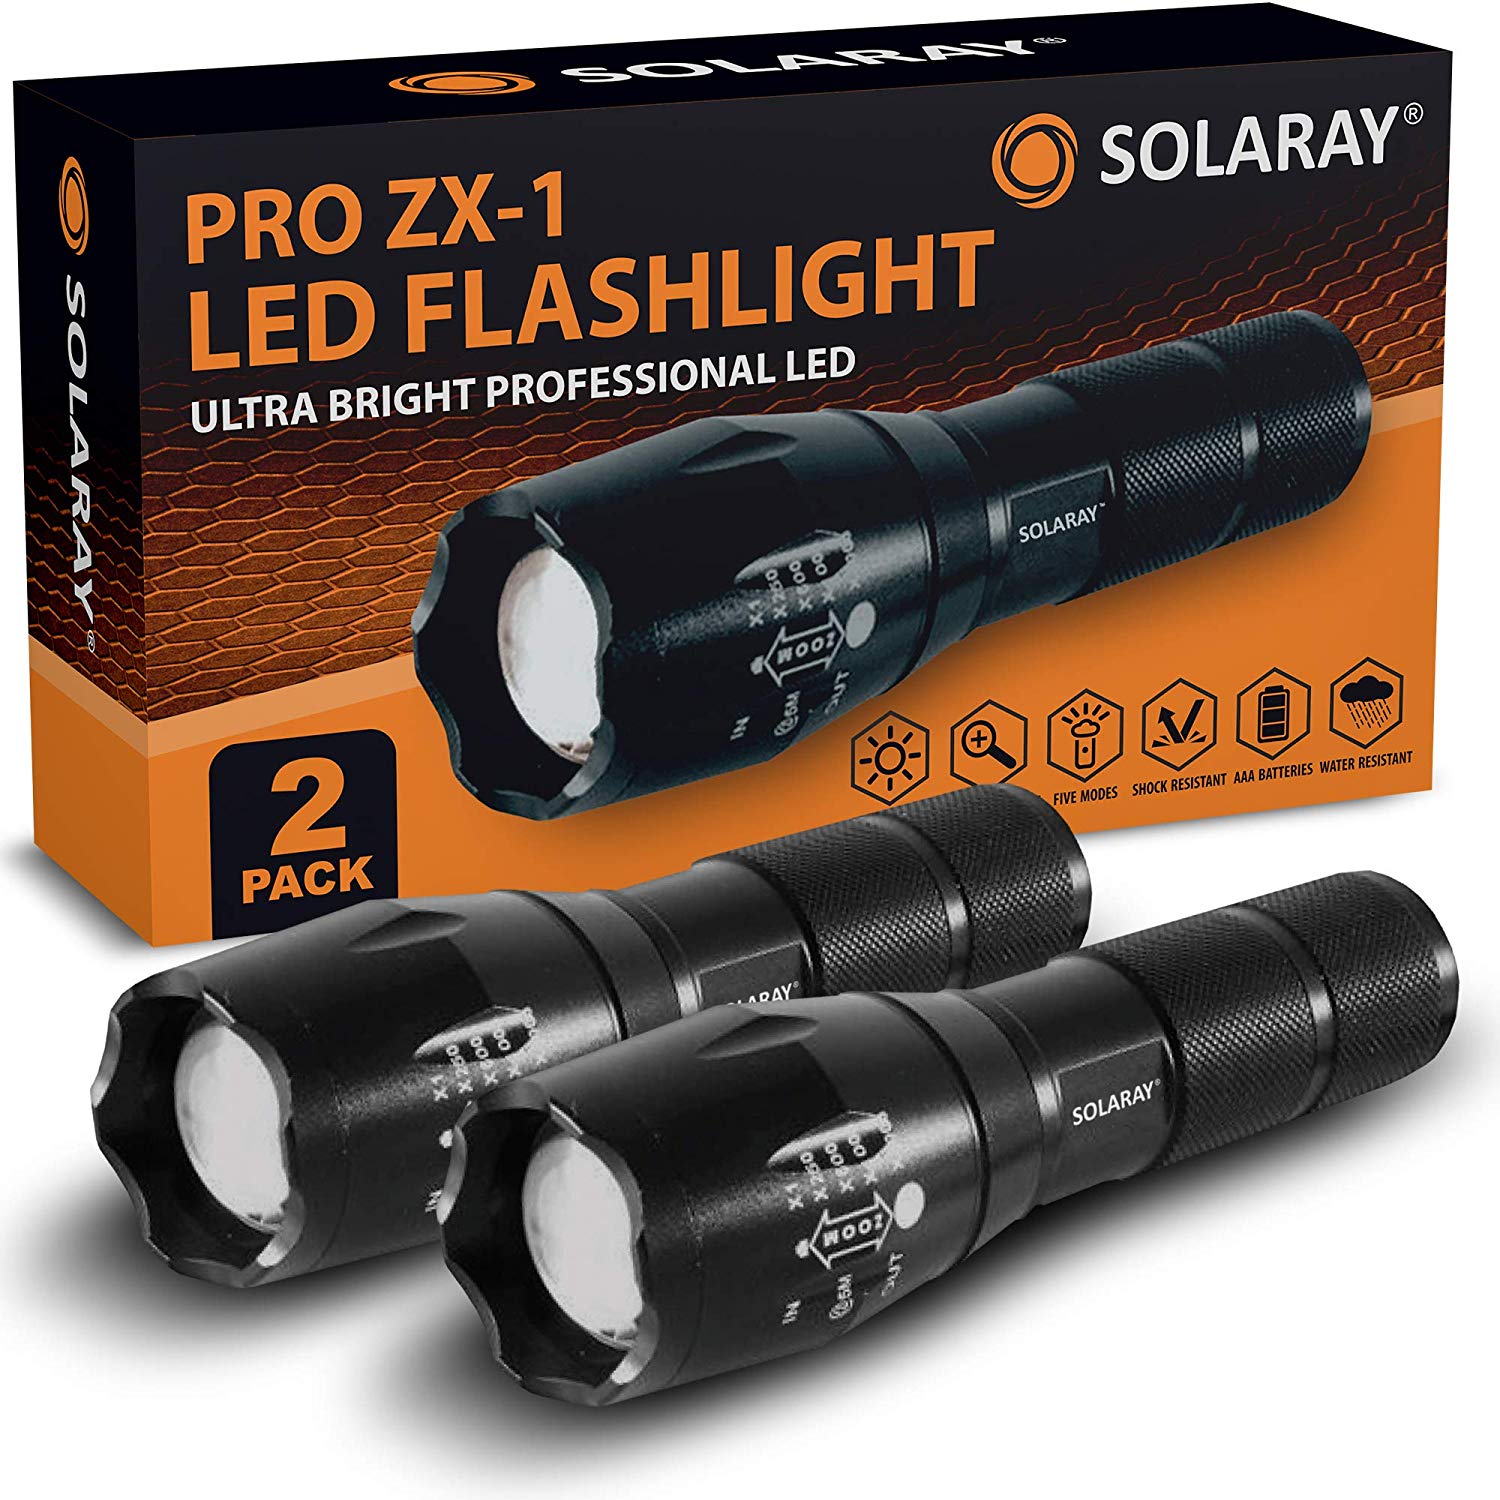 ZX-1 LED Tactical Flashlight with Strobe Light [2 Pack]